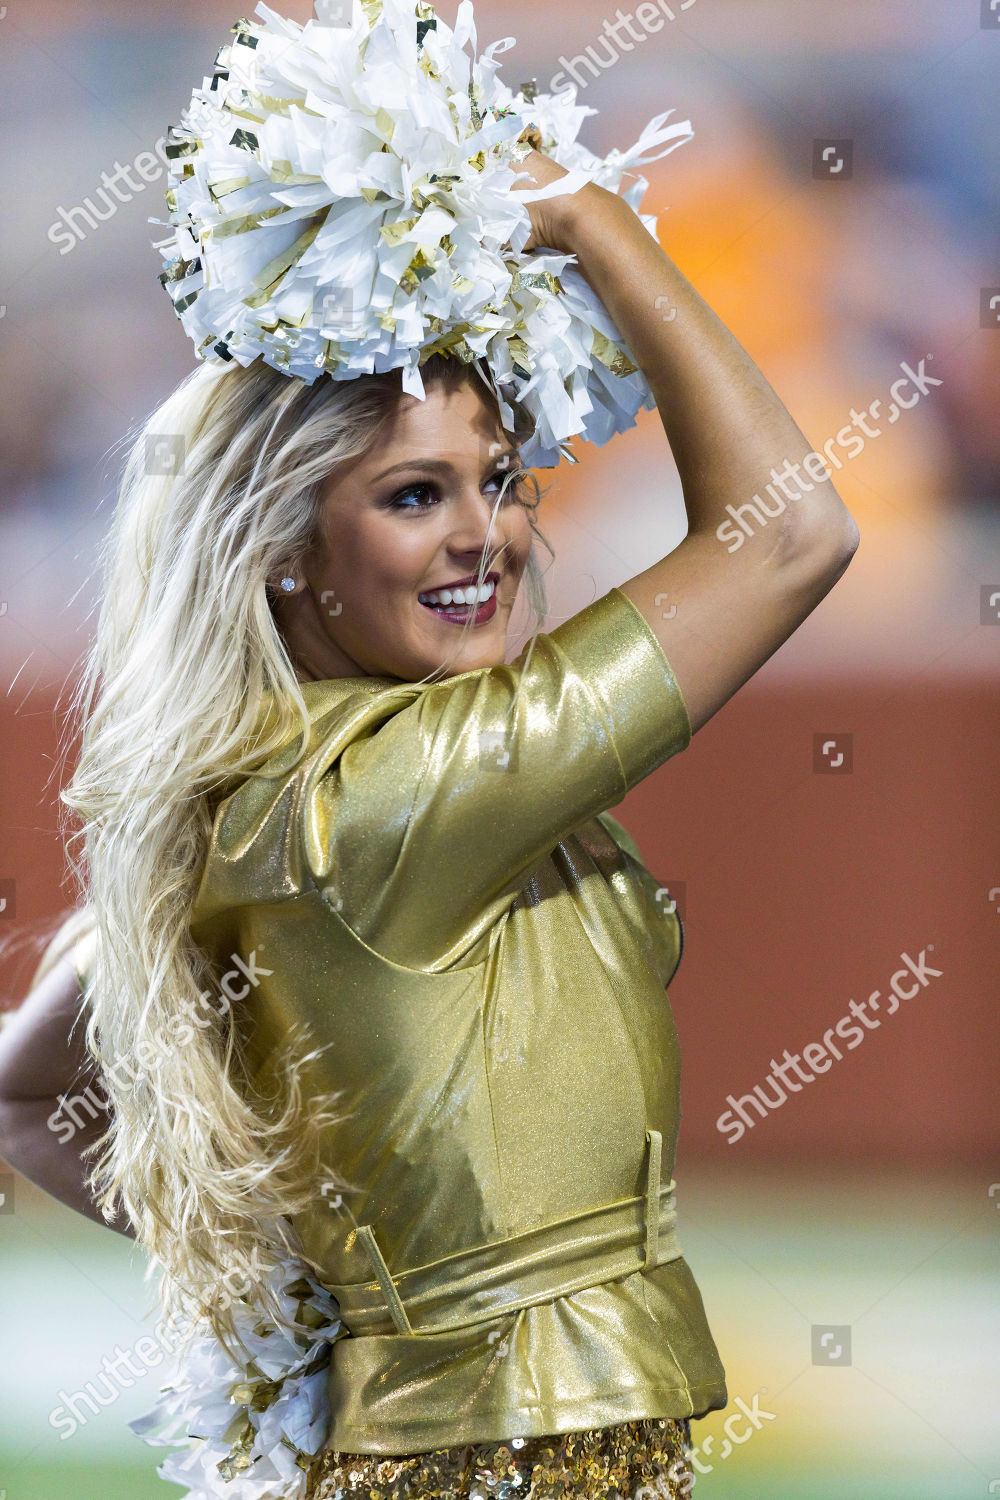 Football Pompoms Stock Photos - 3,046 Images